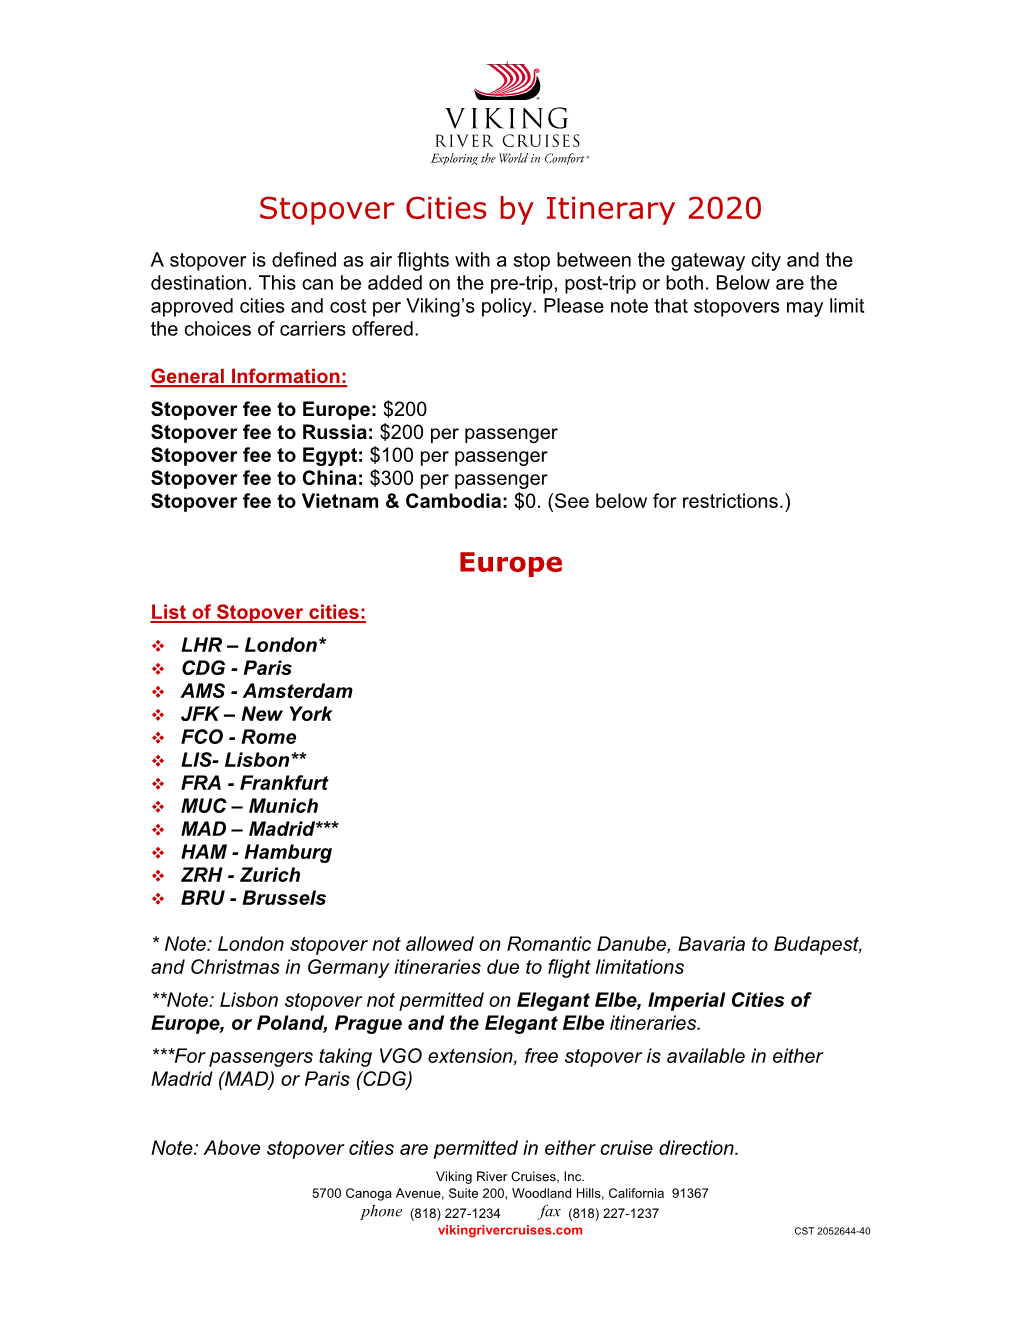 Stopover Cities by Itinerary 2020